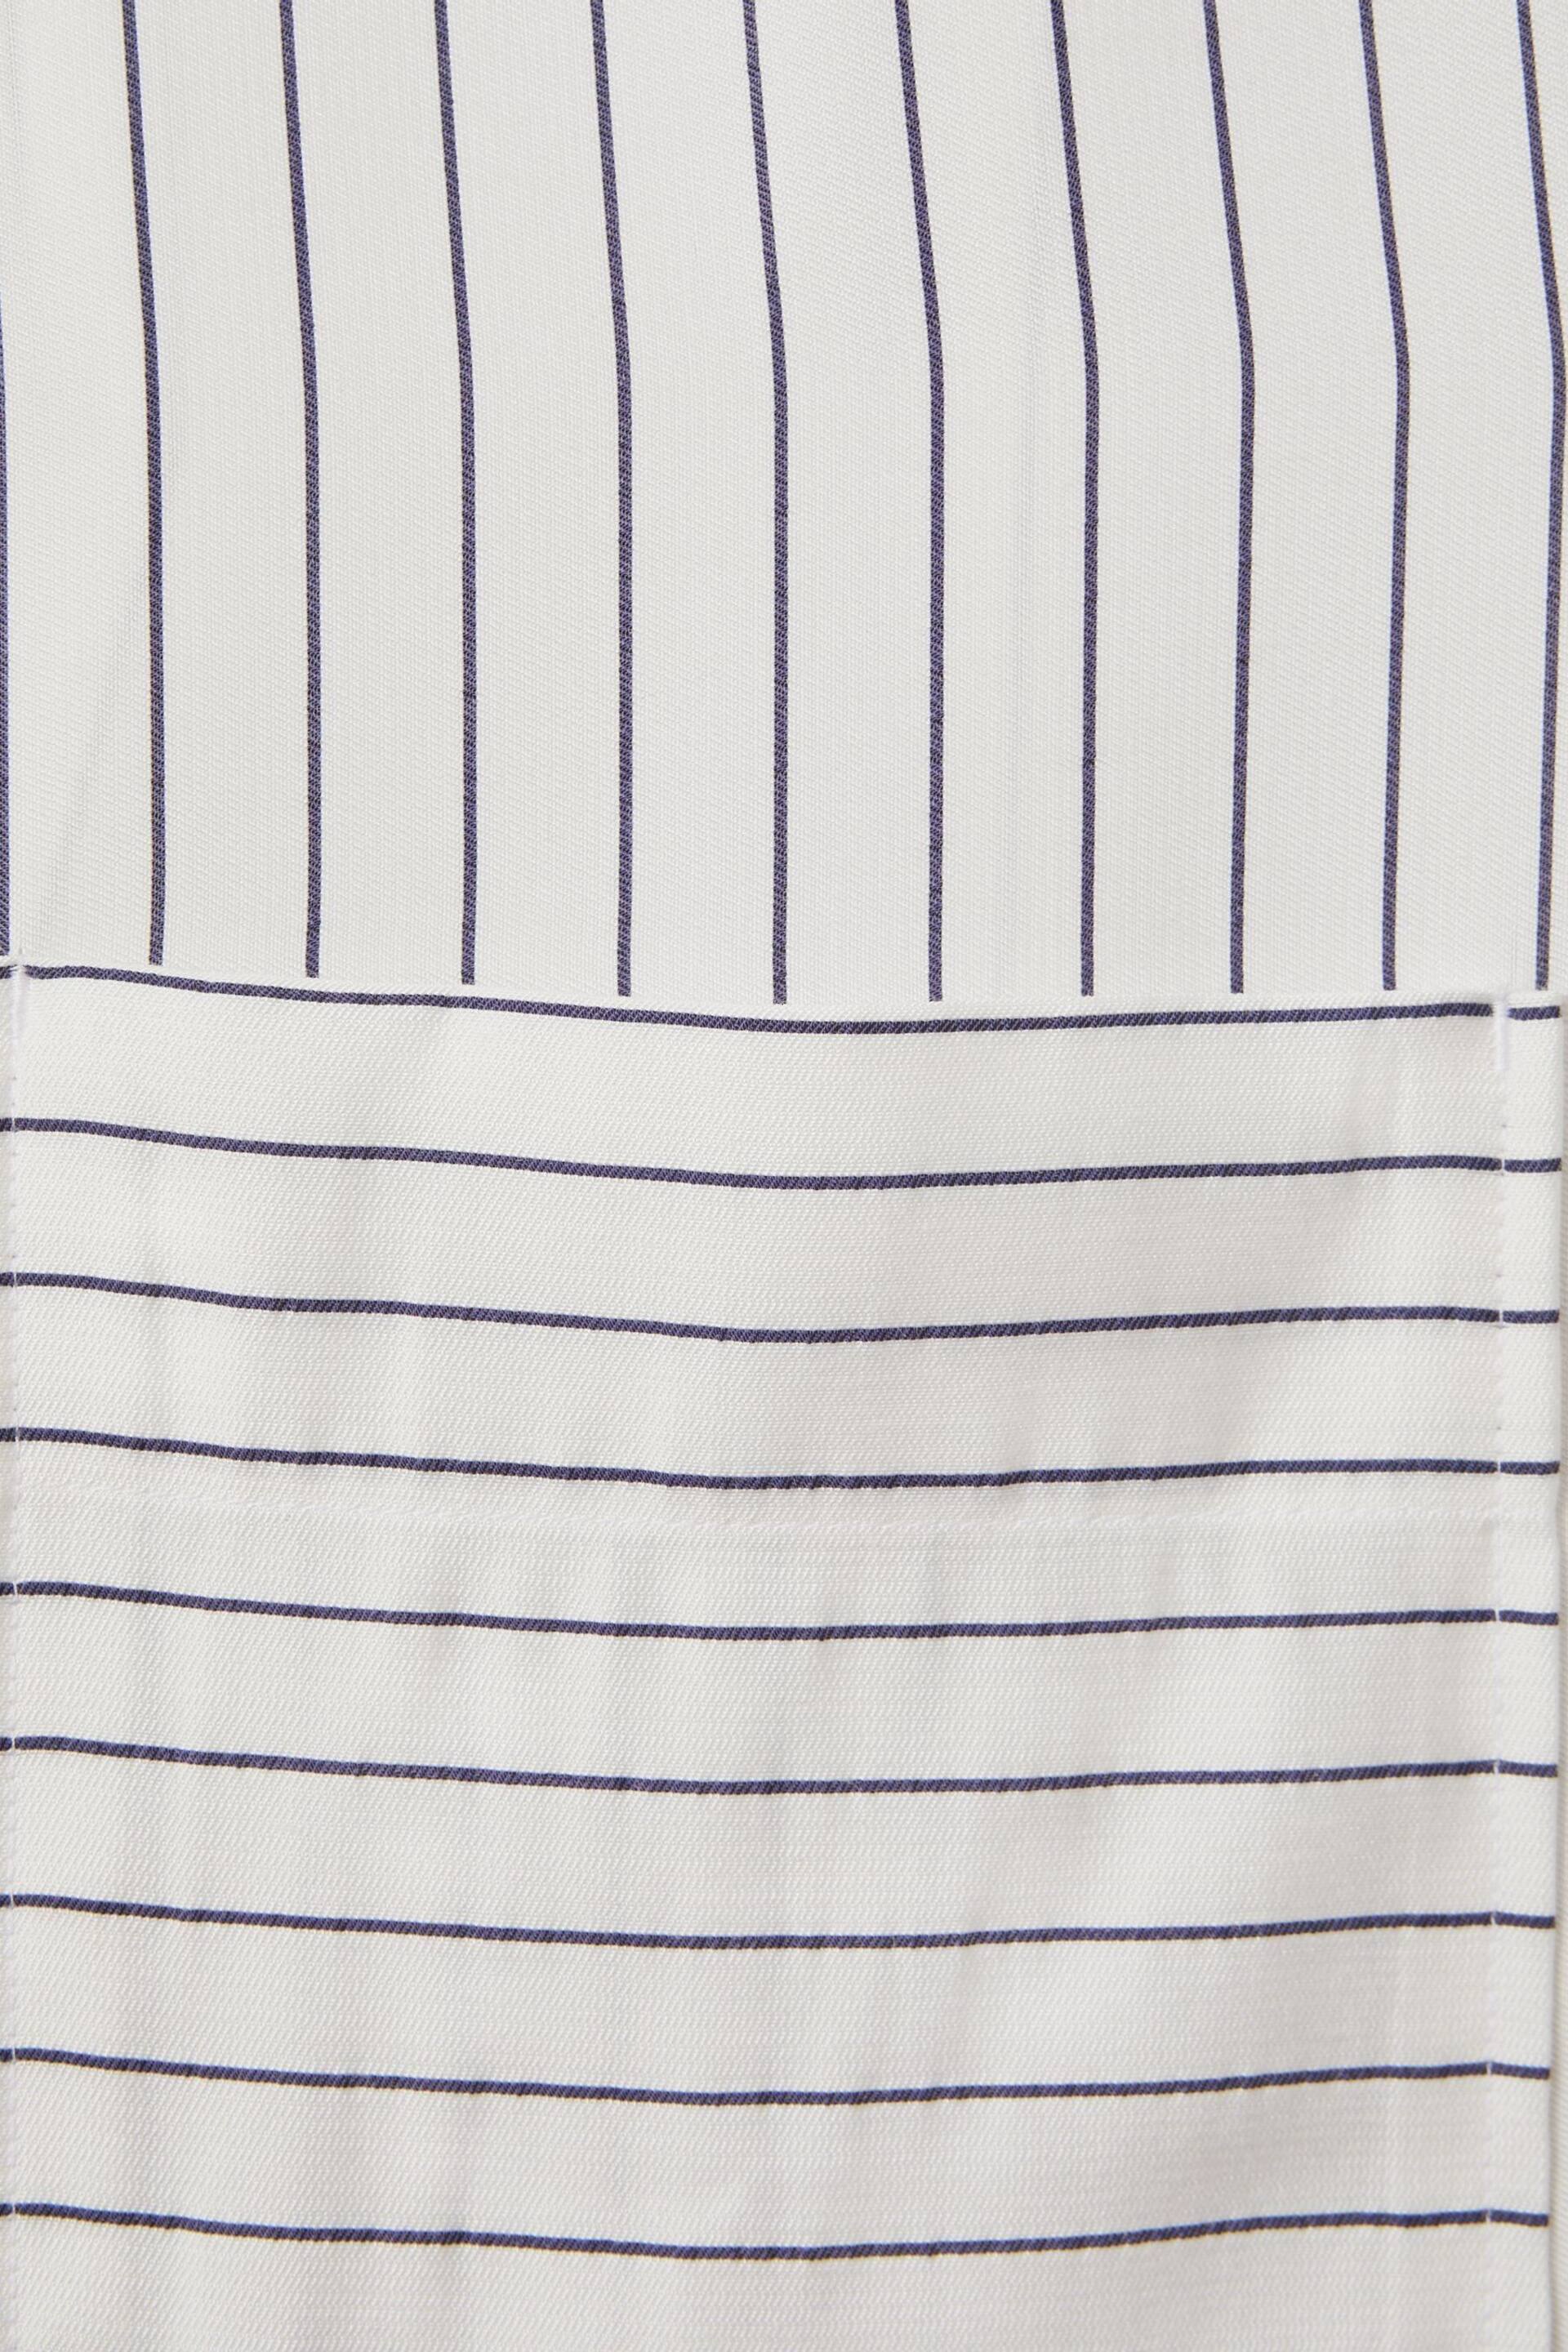 Reiss White/Navy Anchor Boxy Fit Striped Shirt - Image 6 of 6